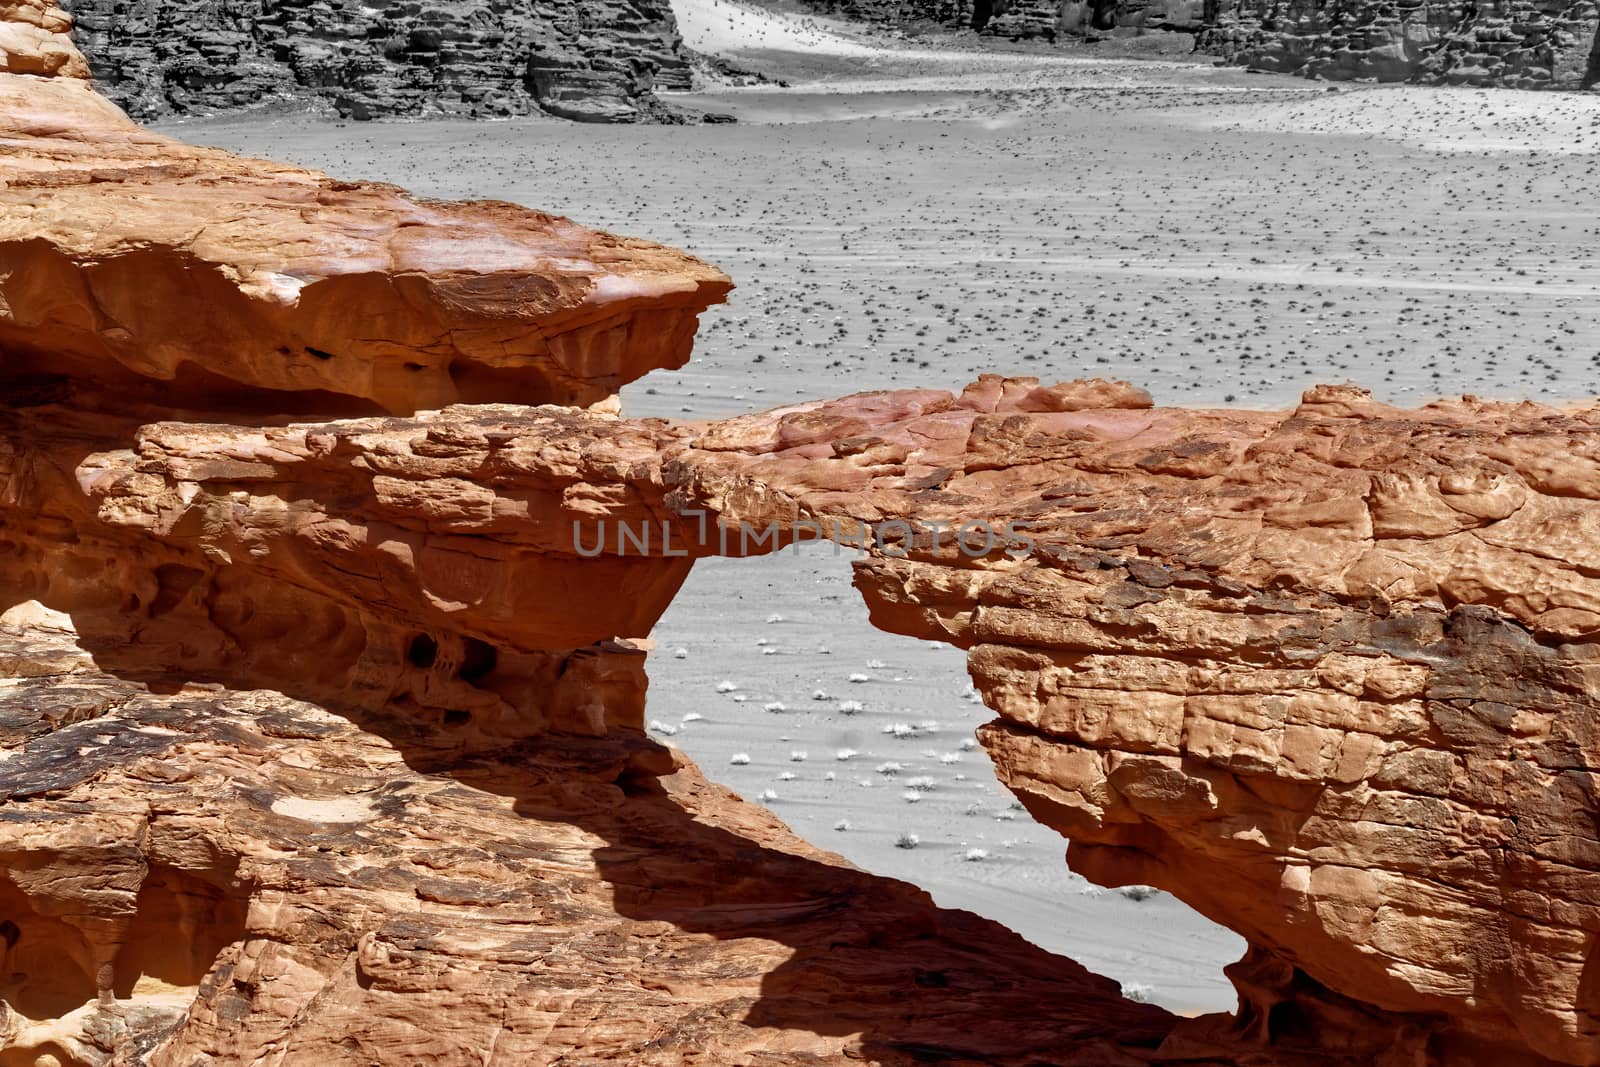 Stone bridge formed by erosion, with black and white alienated background and abstract effect, in the nature reserve of Wadi Rum, Jordan by geogif